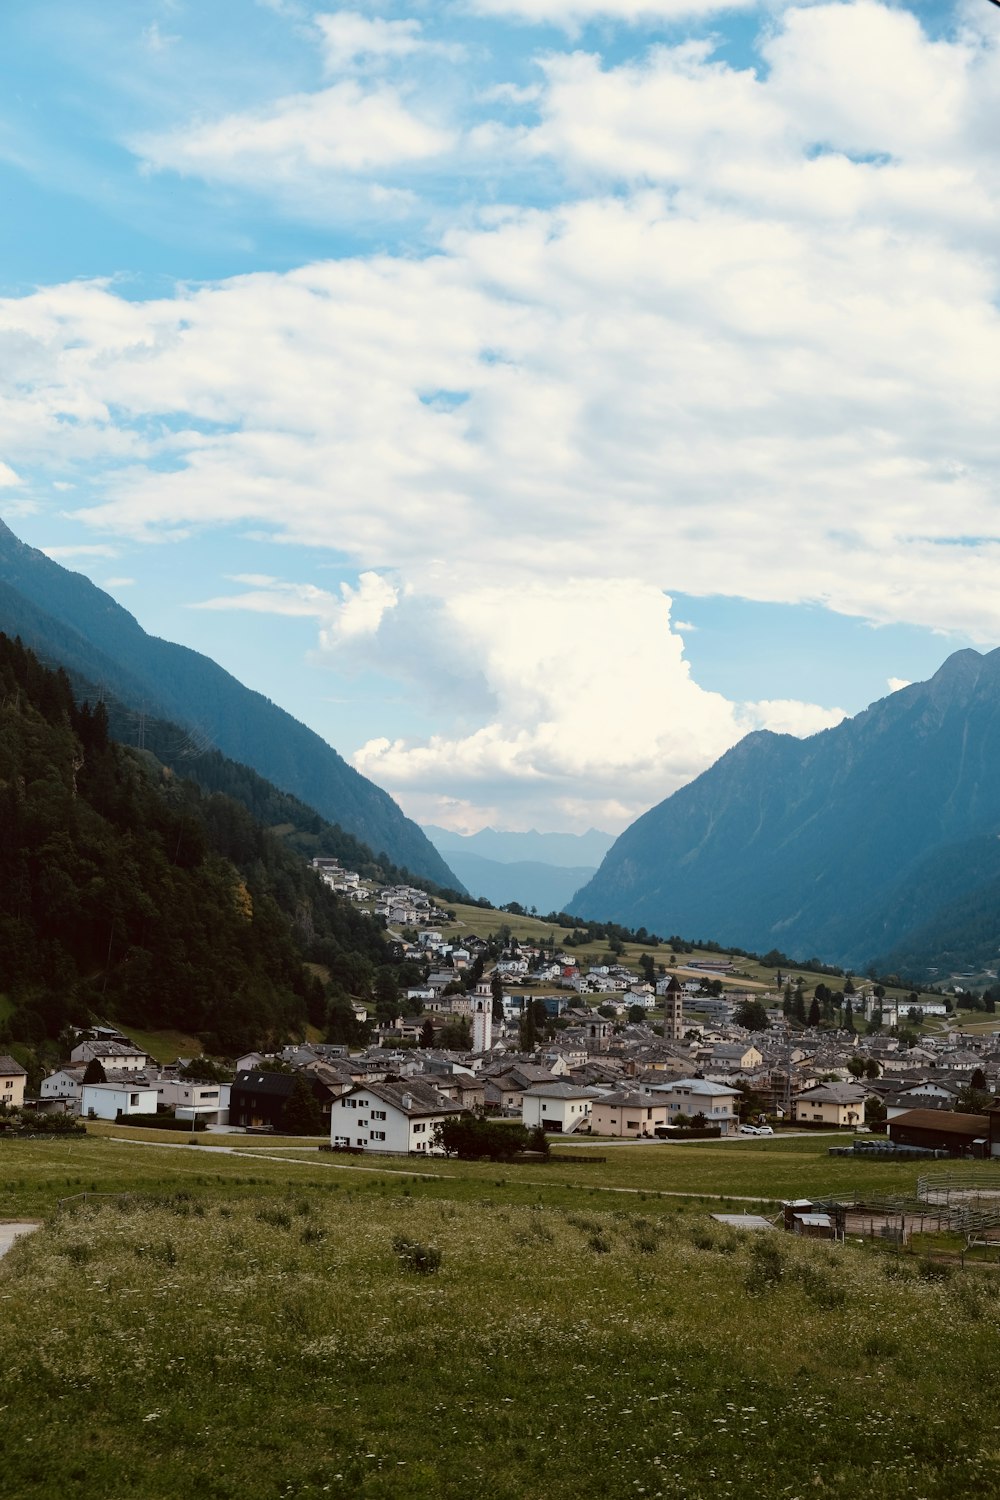 a small town in the valley between mountains